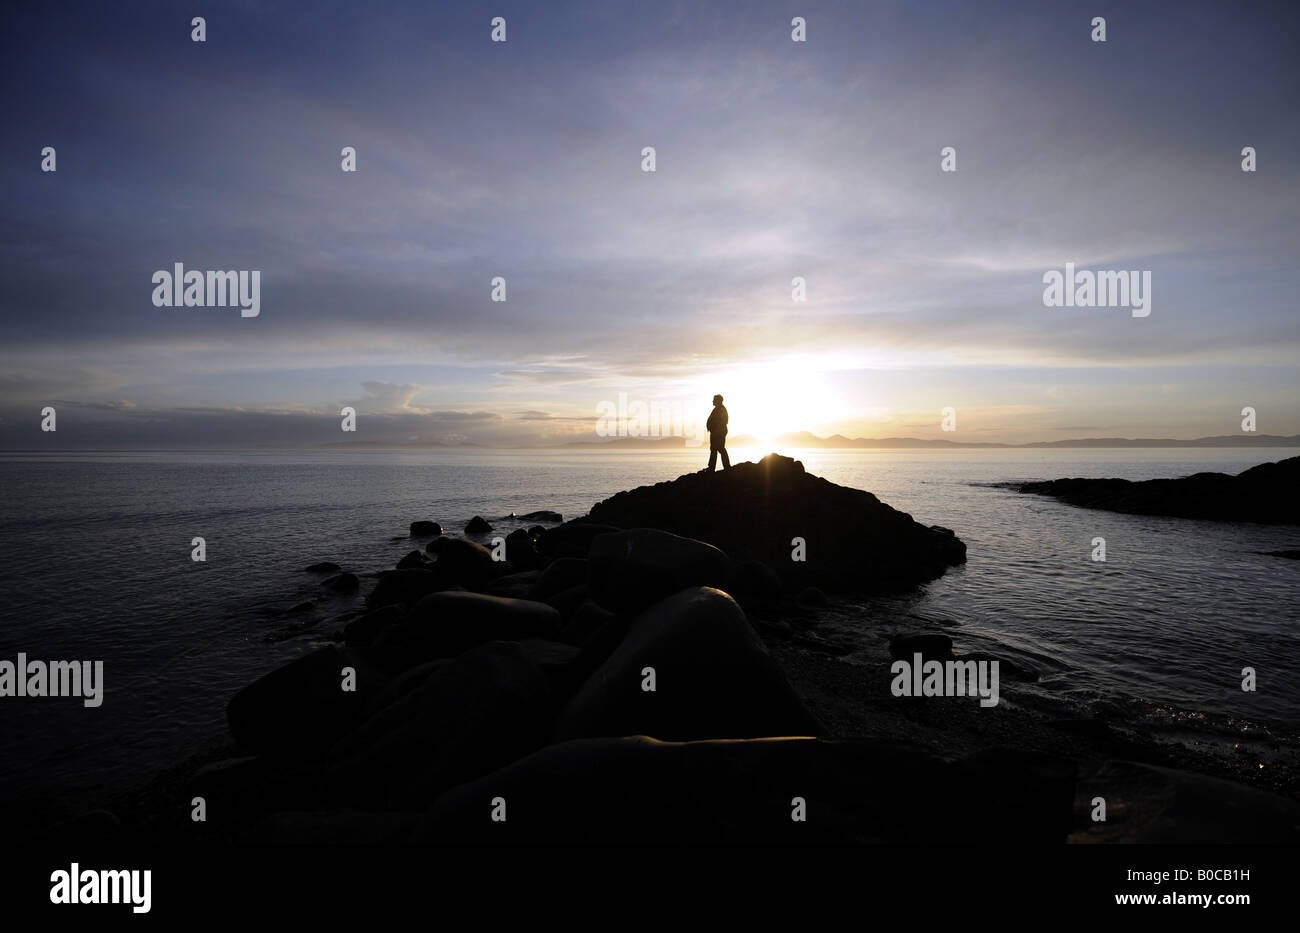 A PERSON LOOKING INTO A SUNSET FROM KINTYRE TO THE ISLE OF JURA IN NORTH WEST SCOTLAND,UK. Stock Photo